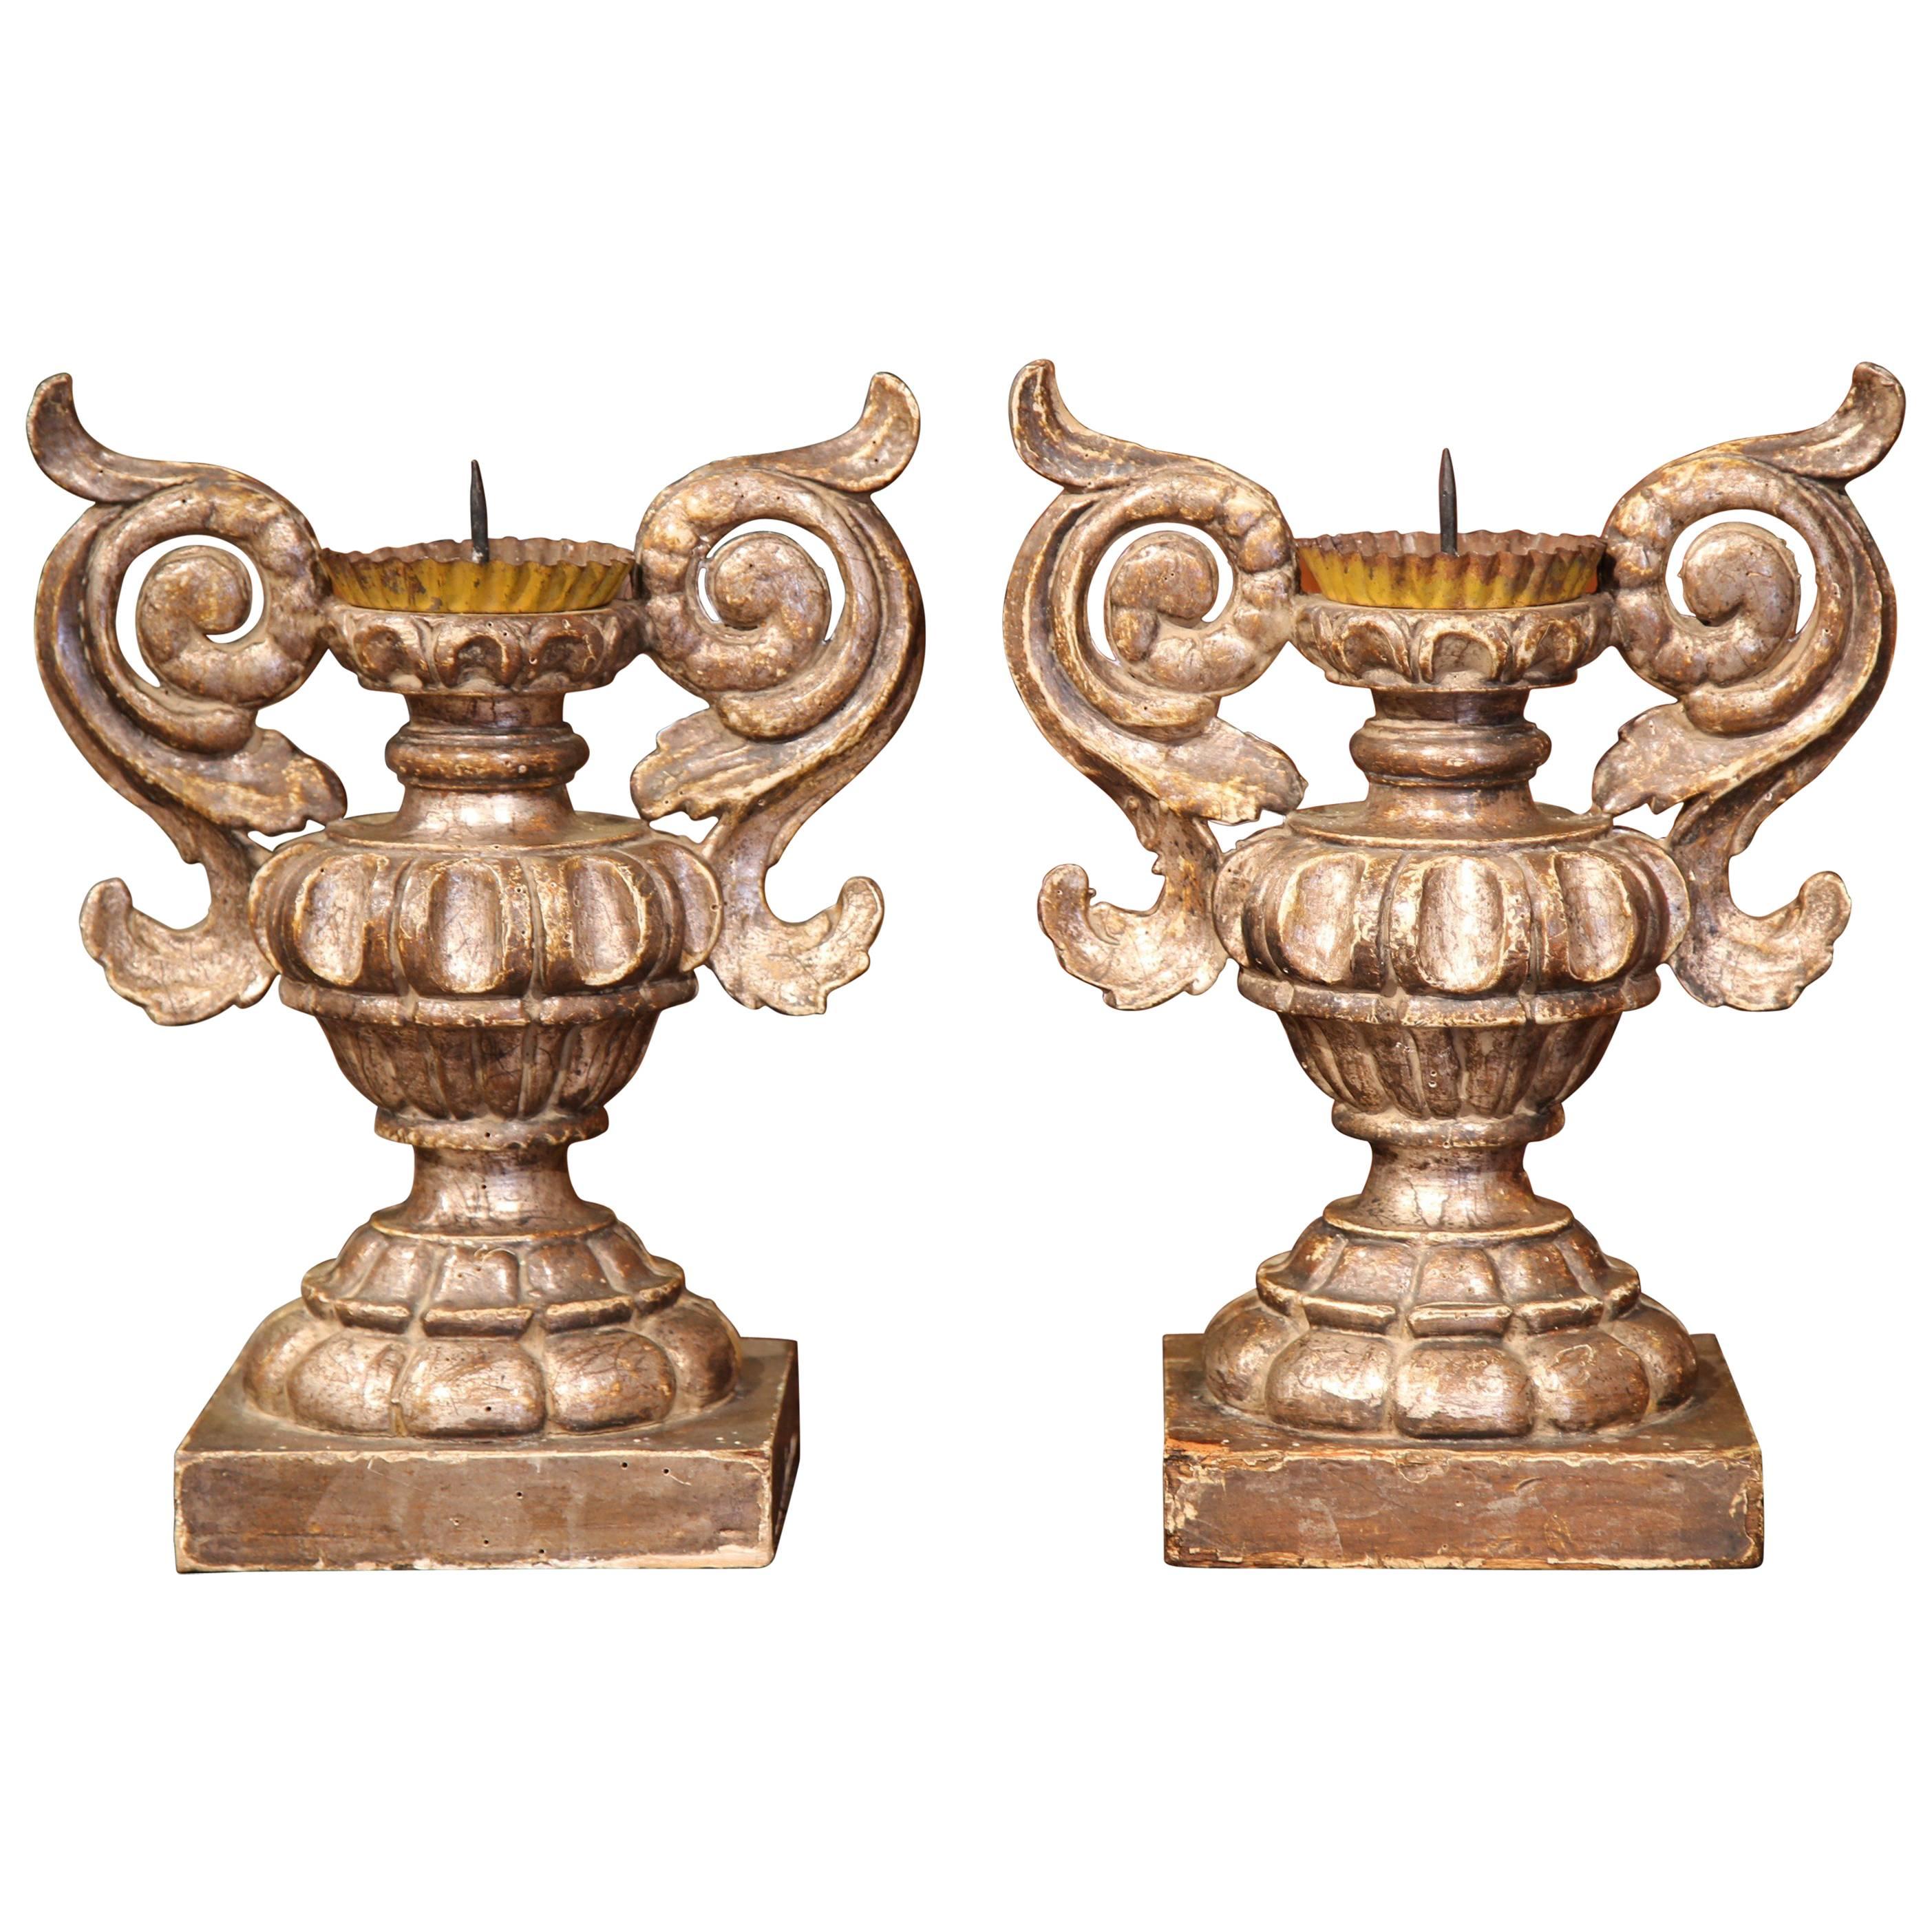 Pair of 19th Century Italian Baroque Carved Silverleaf Candlesticks Prickets